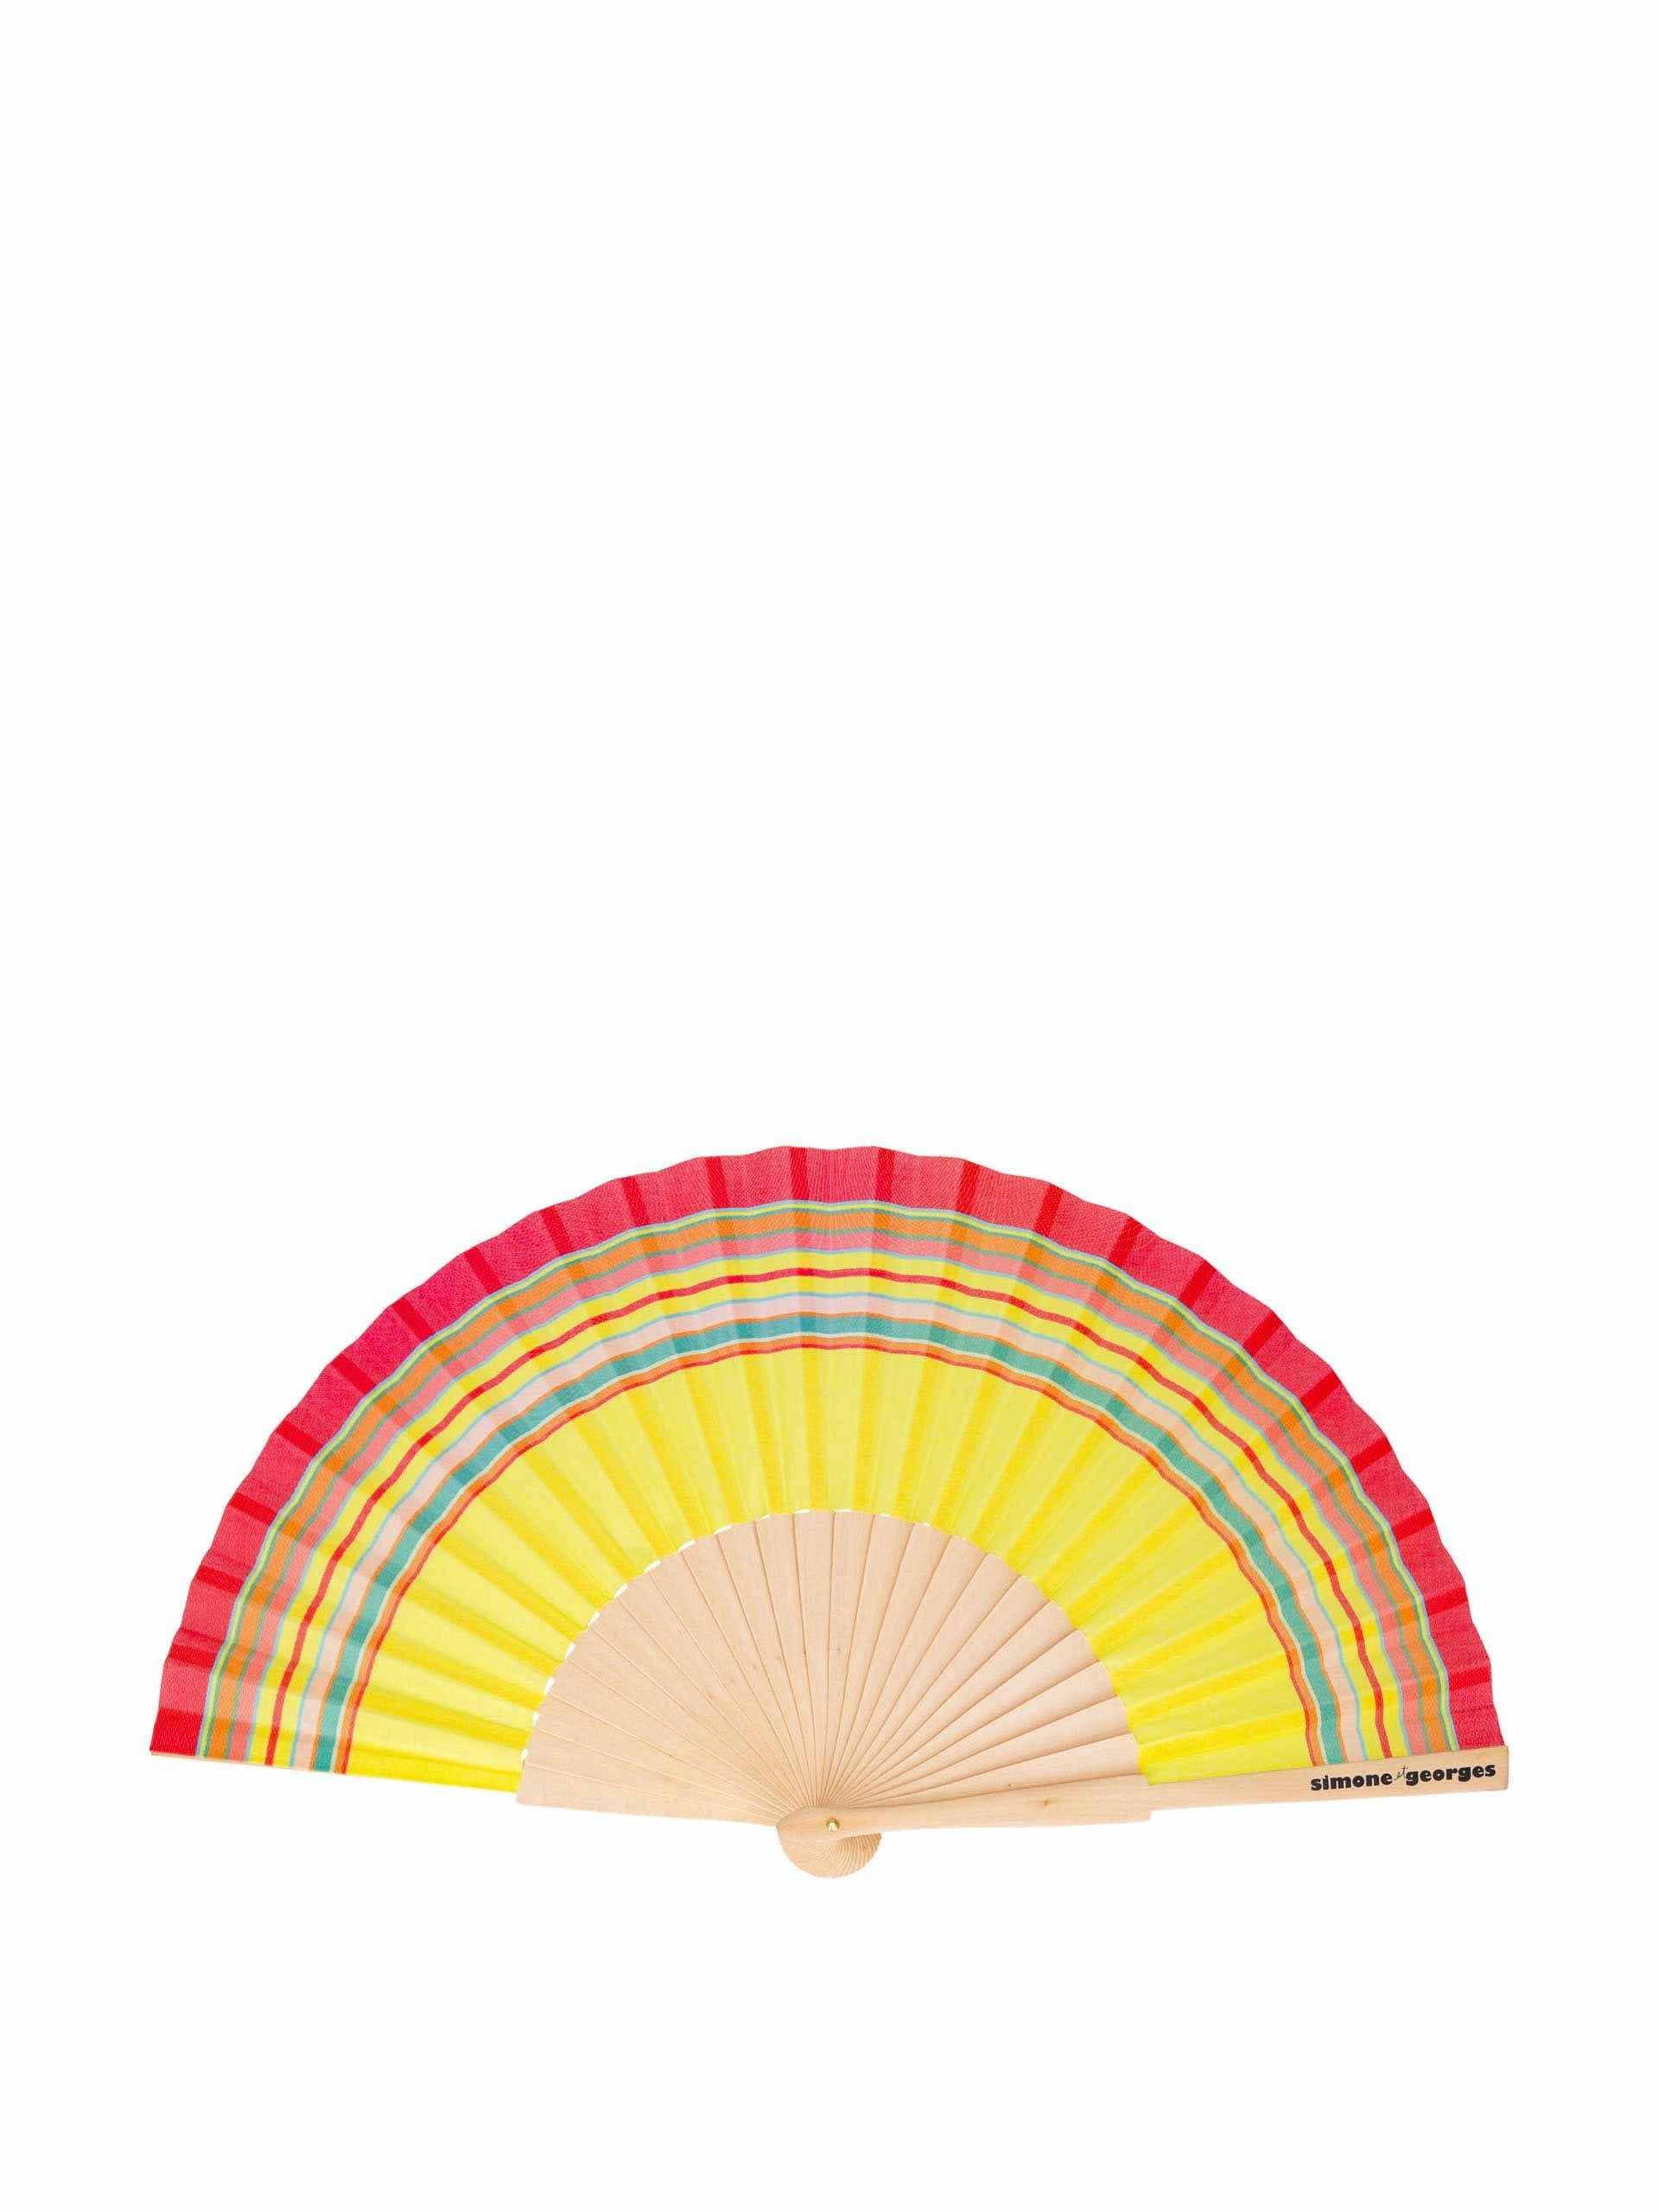 Cotton and wood hand fan